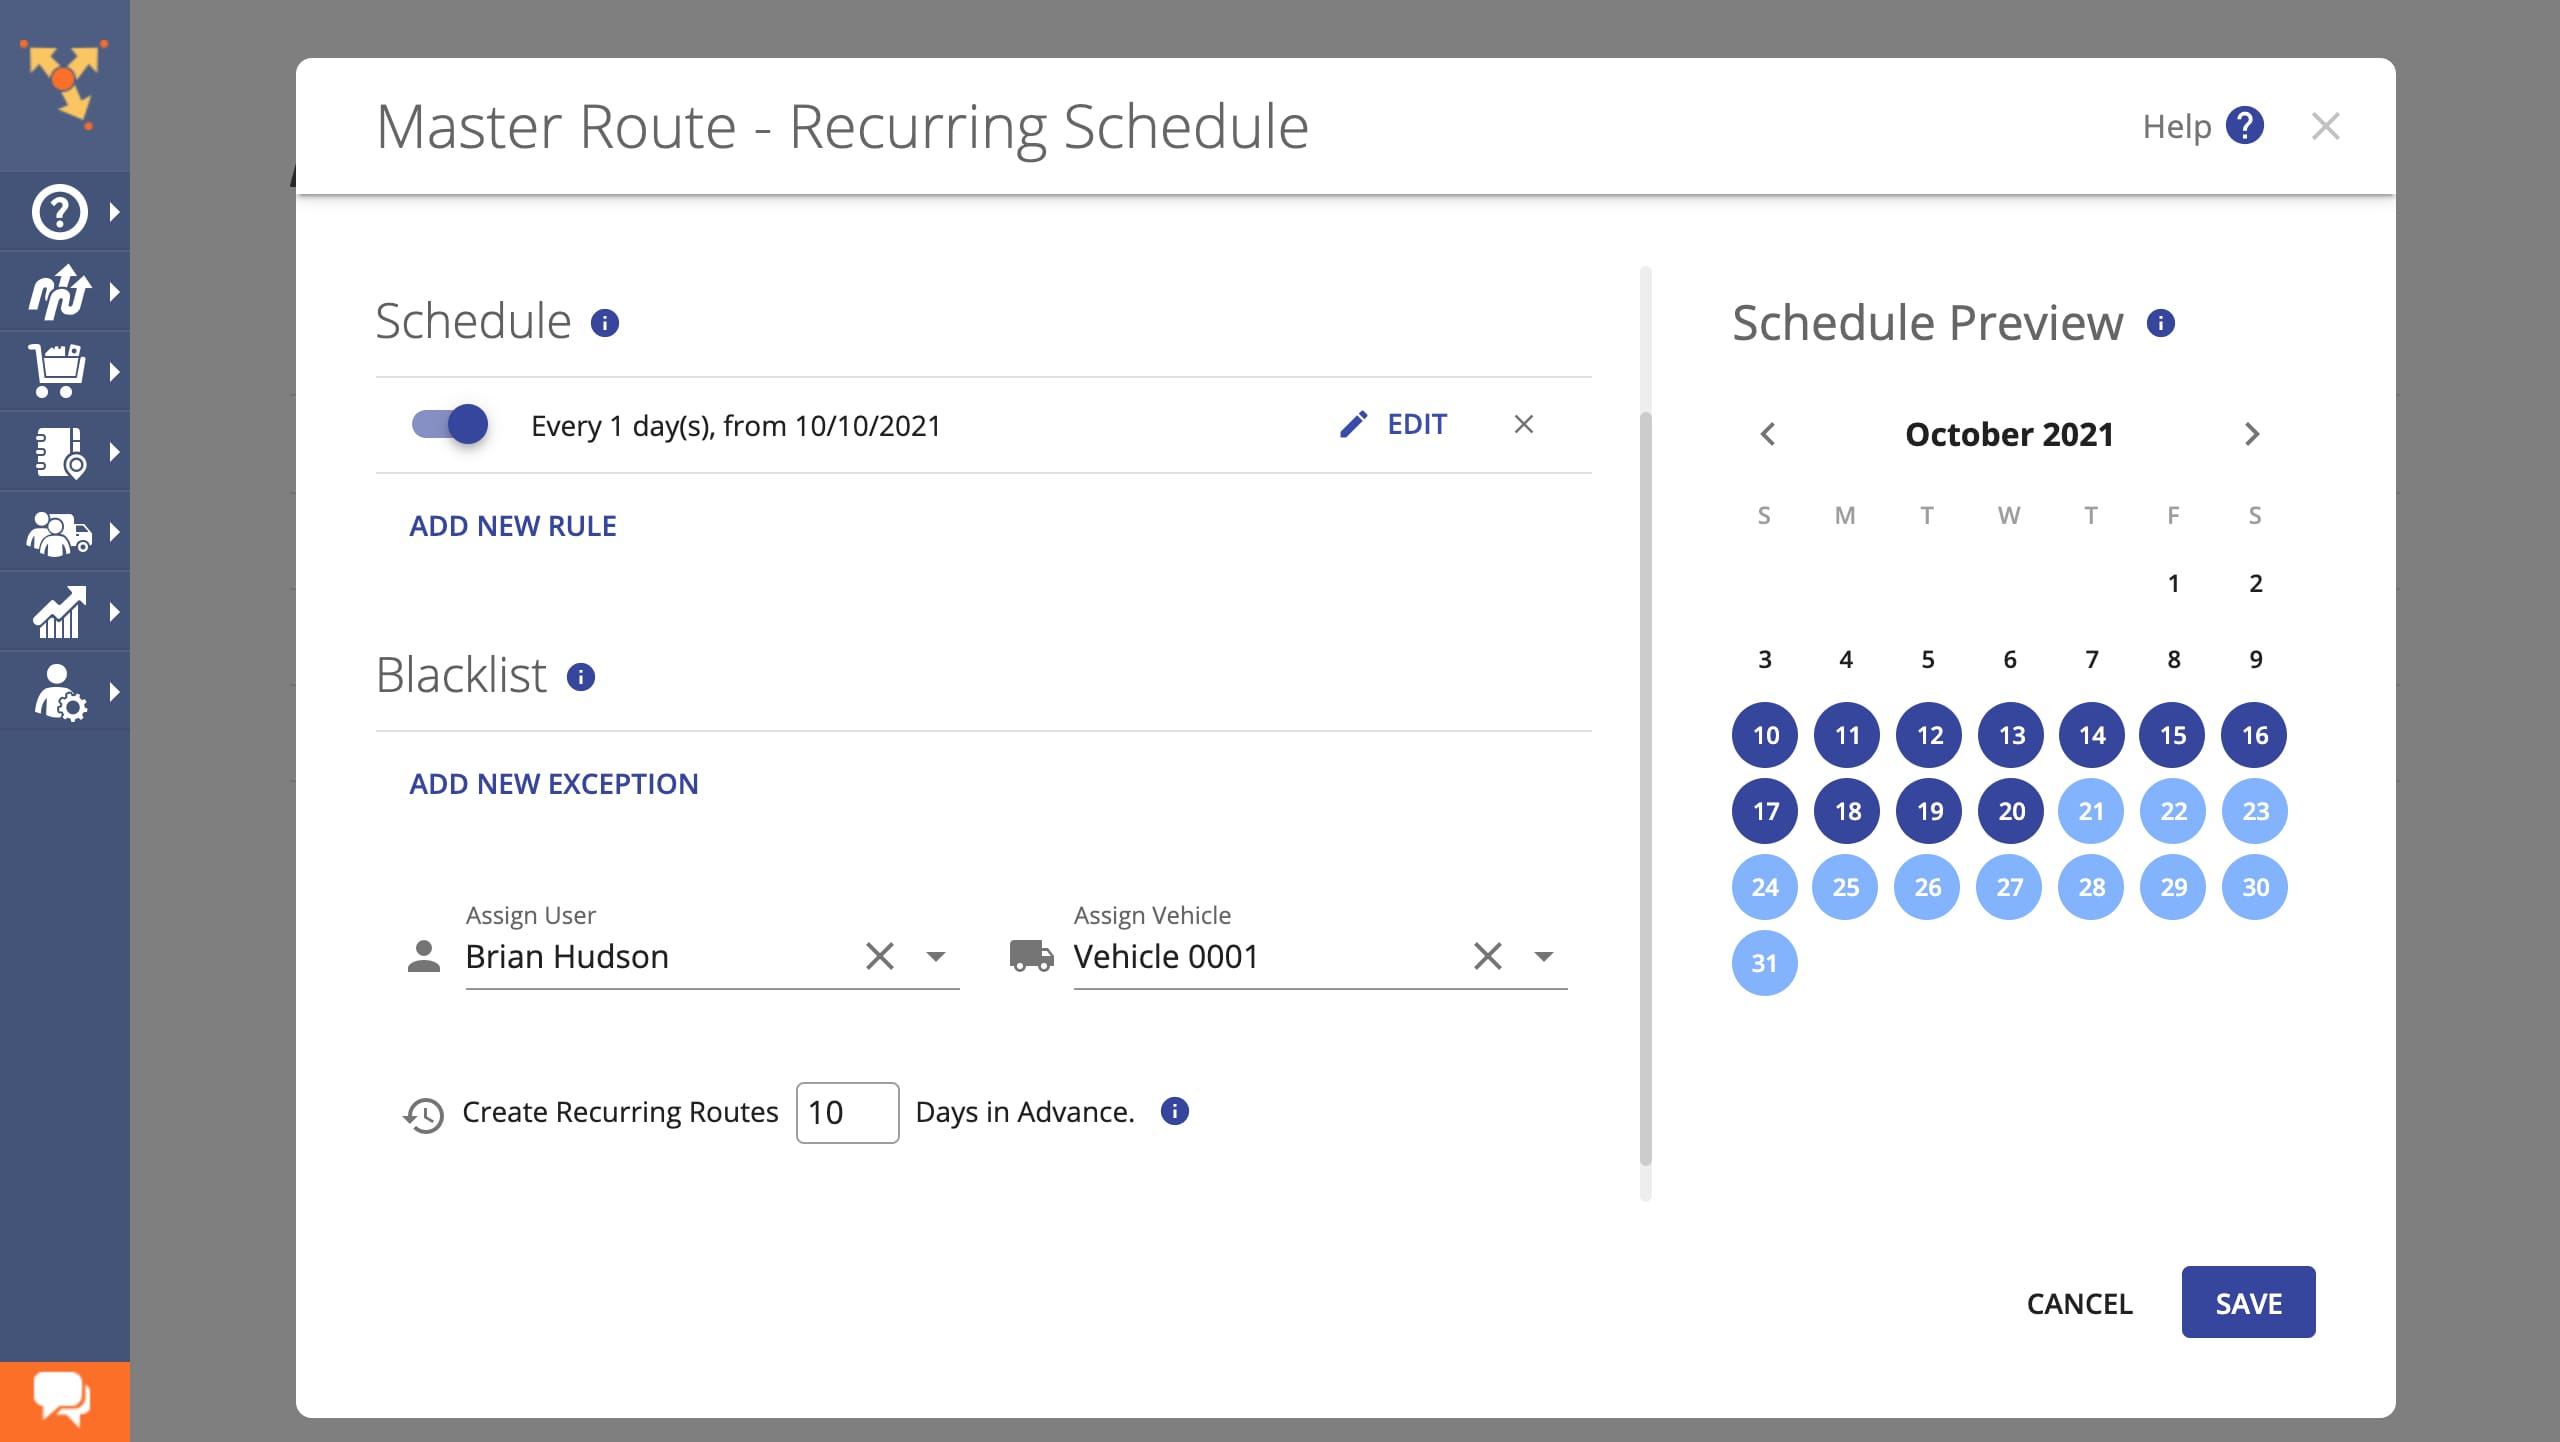 Recurring routes schedule and delivery calendar show already planned and scheduled future routes.